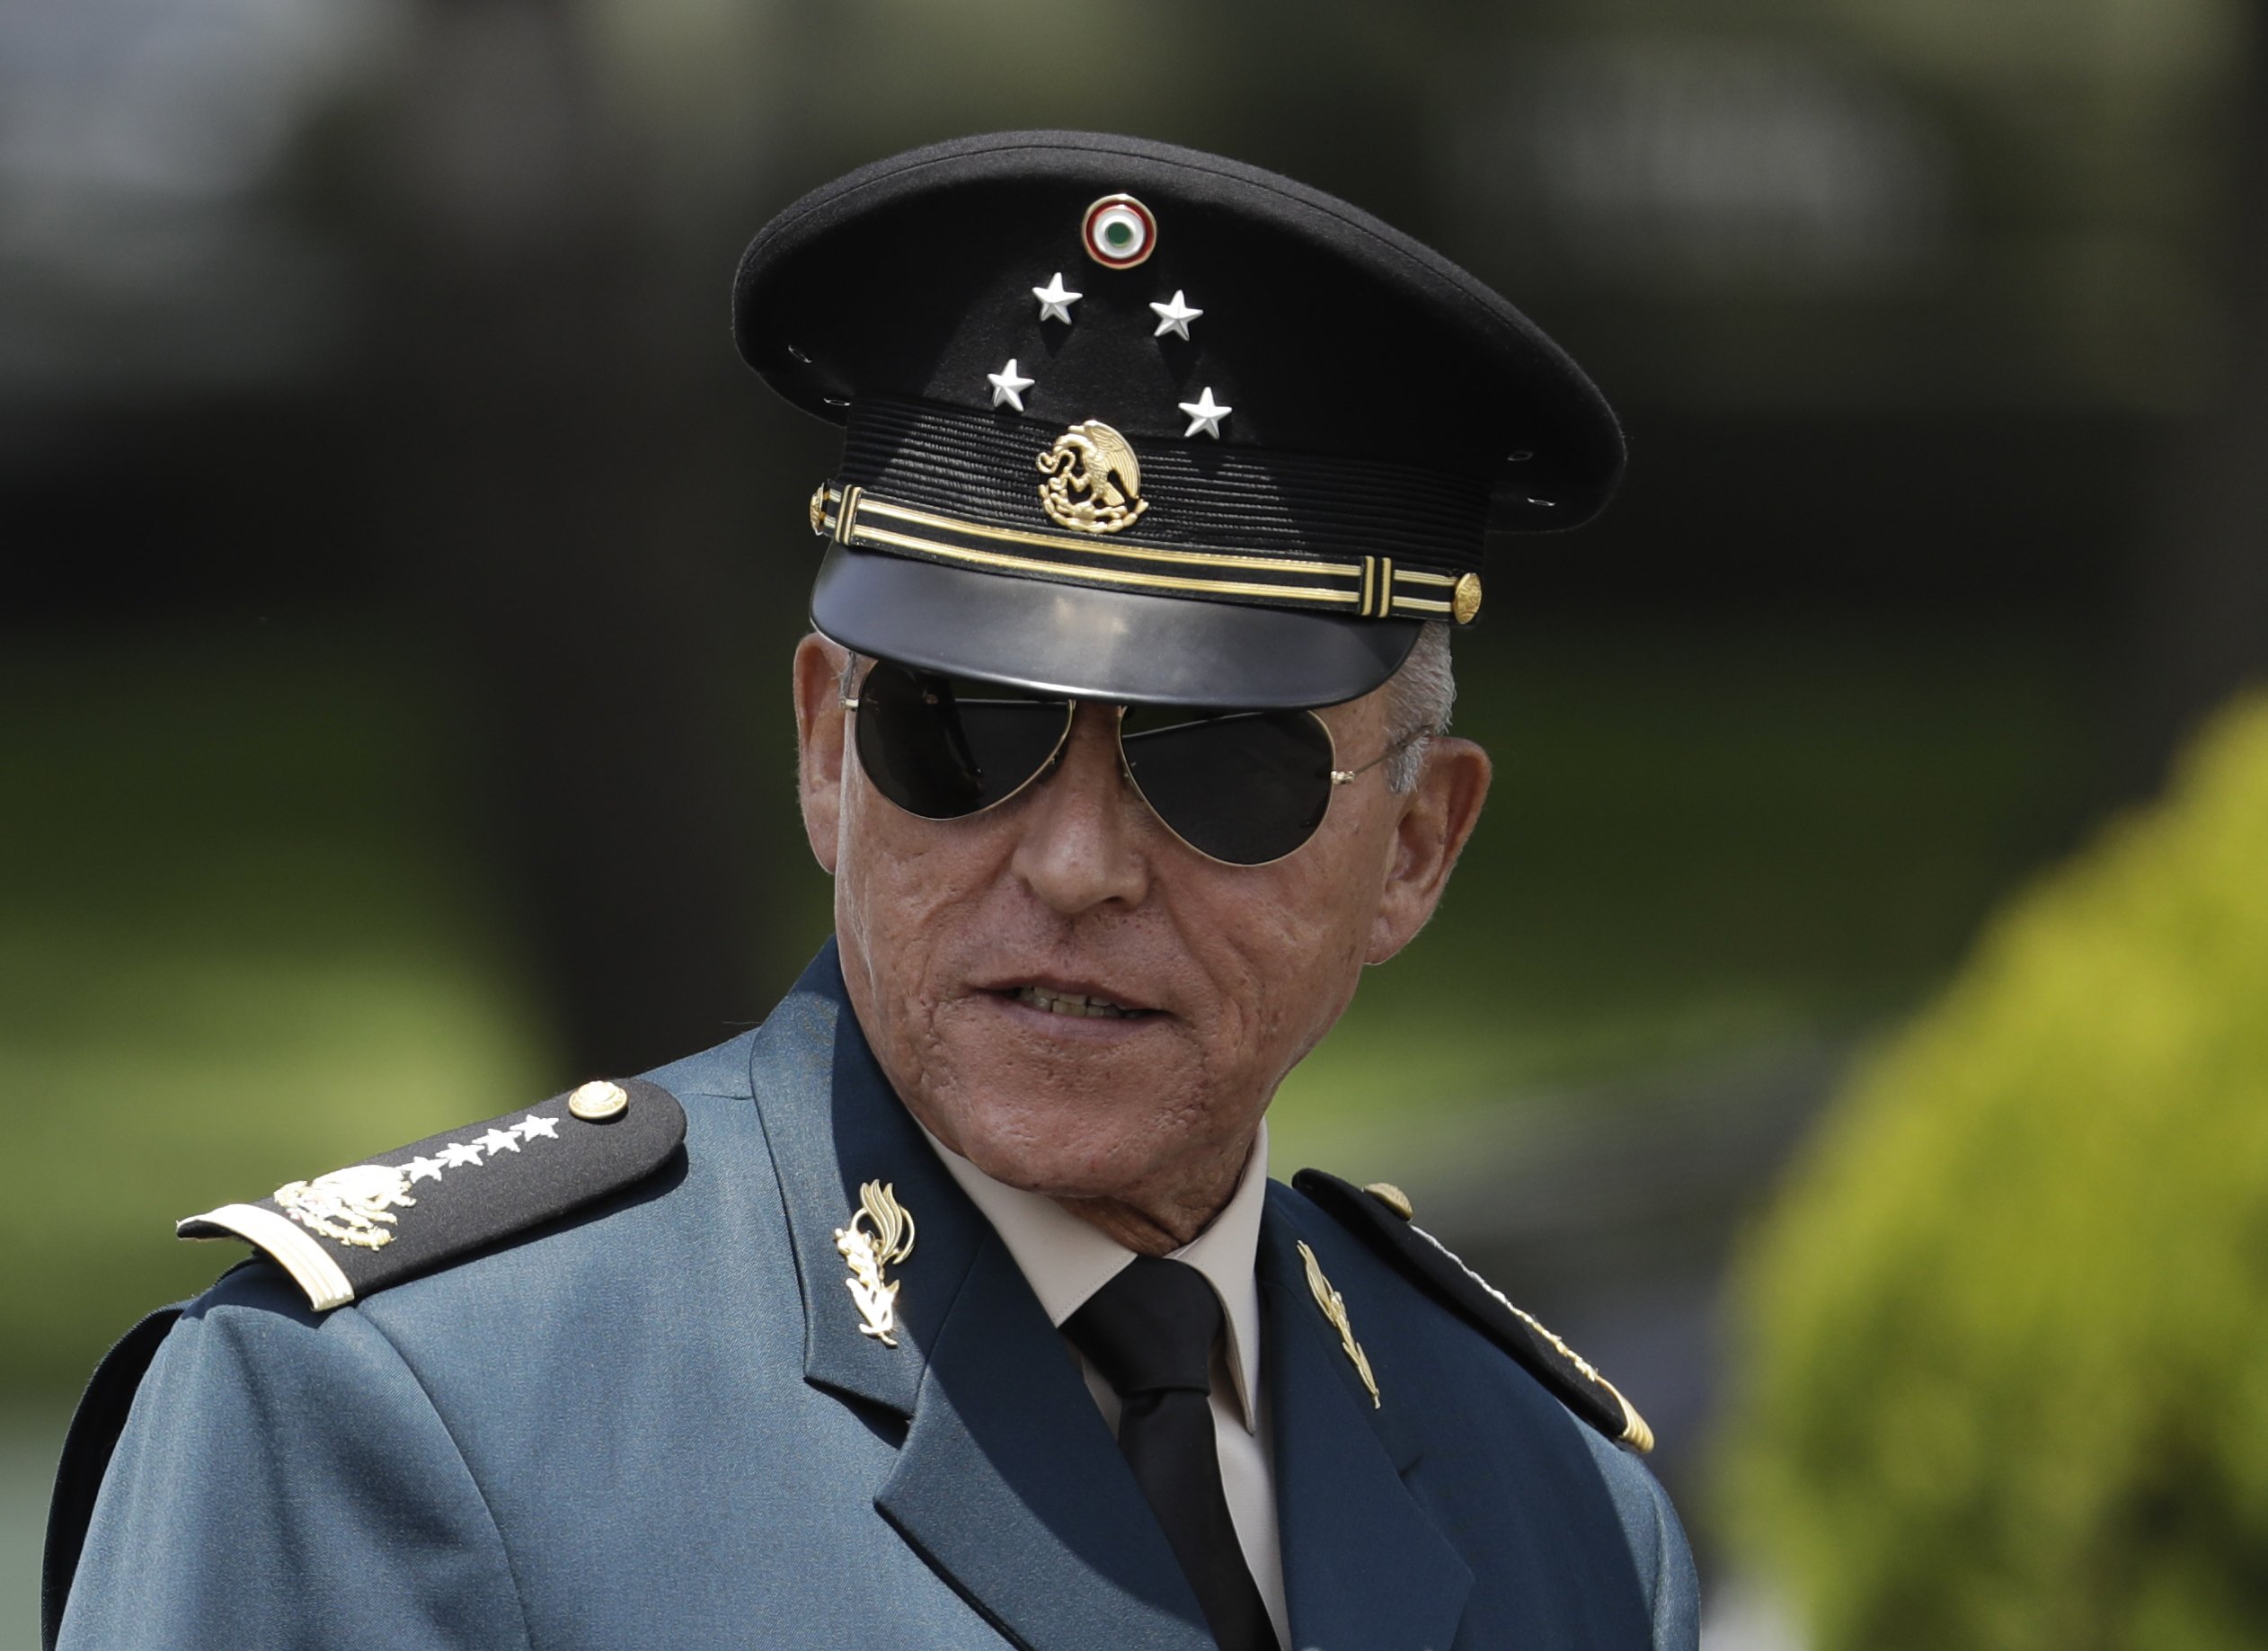 Mexico publishes intensely edited investigation of exonerated general